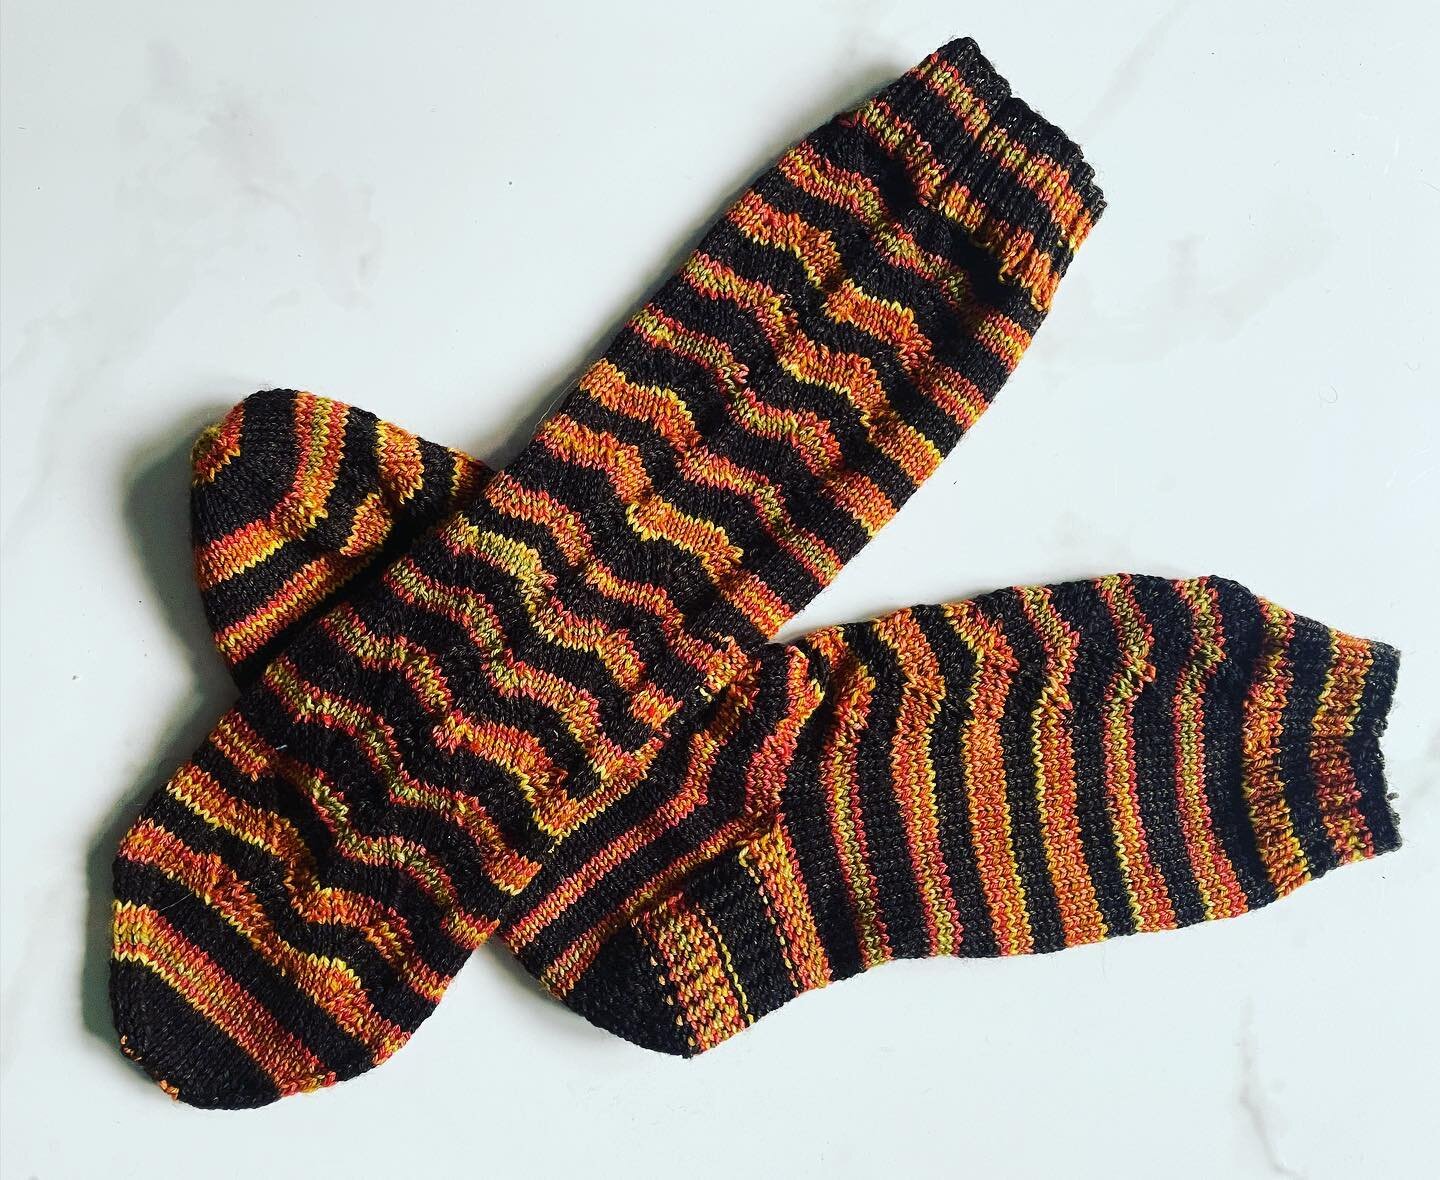 A sock so nice I made it twice... I also did that because I&rsquo;m blessed with two sweet feet that take me up and down and everywhere my little heart desires. This week I&rsquo;m heading out of the city to knit a new pair of socks out in the countr